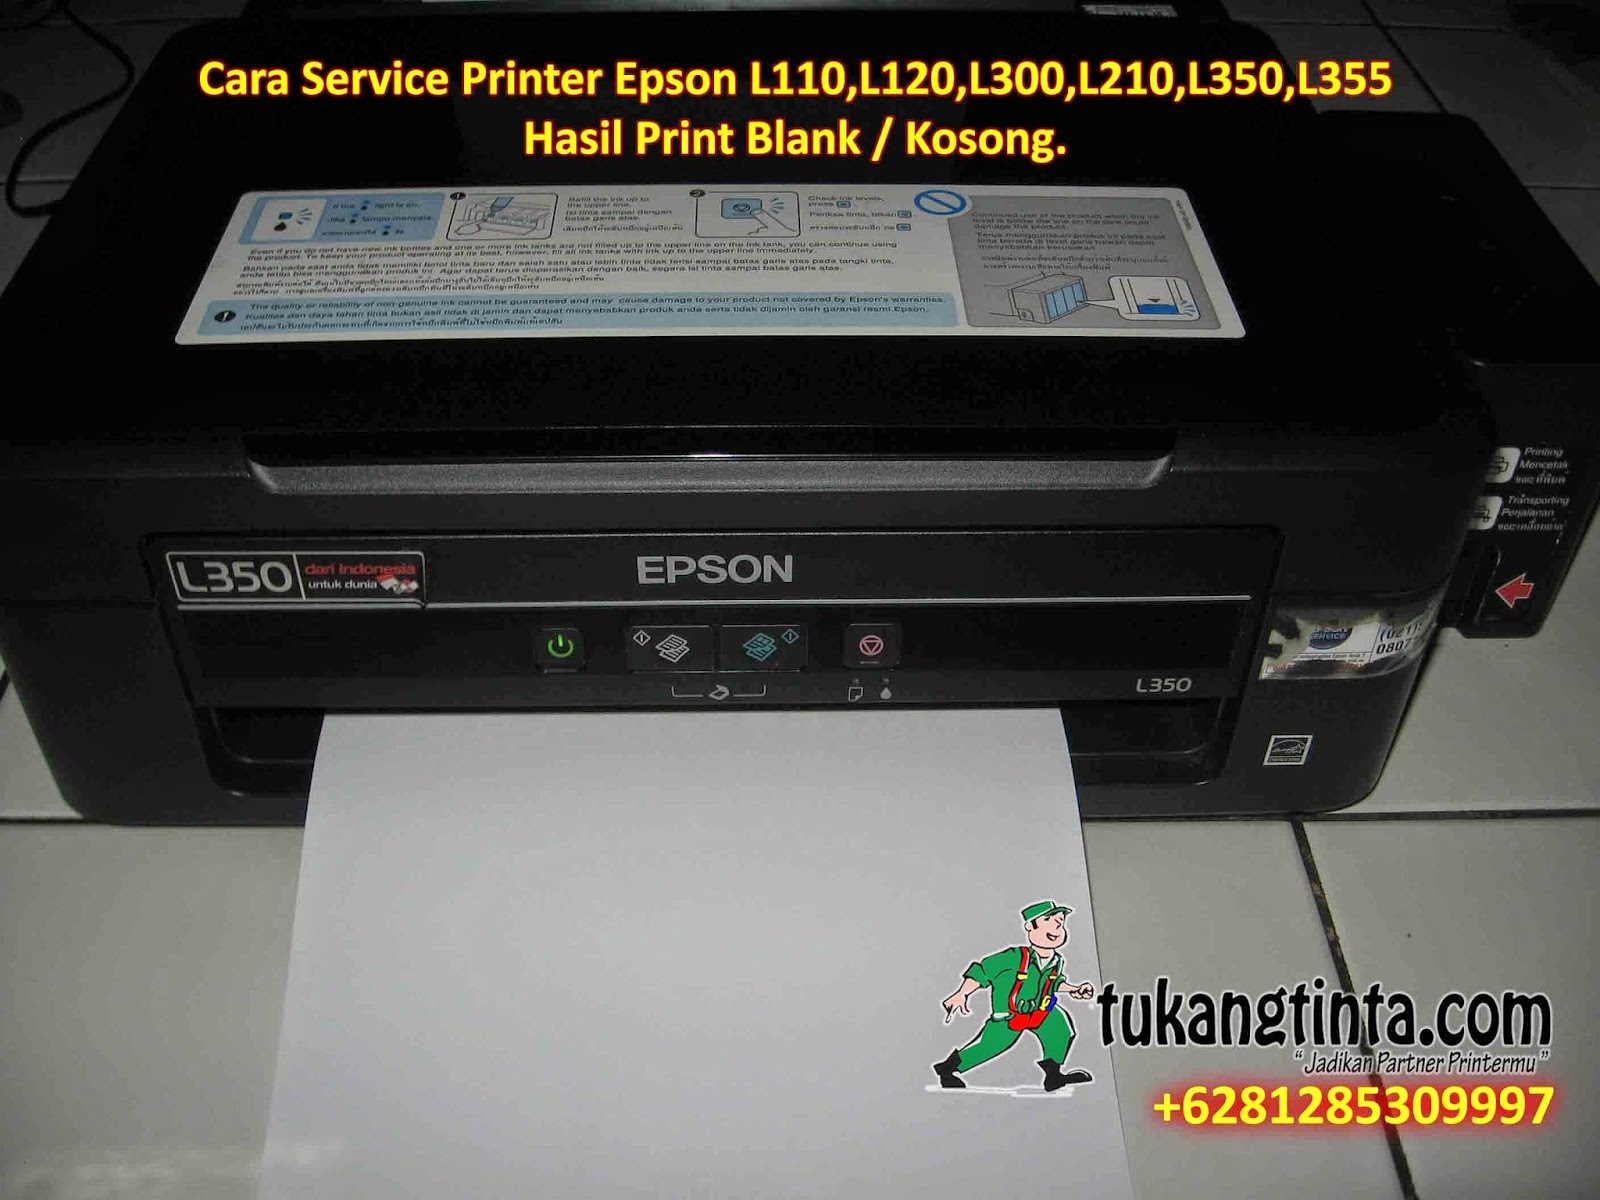 Resetter Tinta Epson L210 | HAIRSTYLE GALLERY